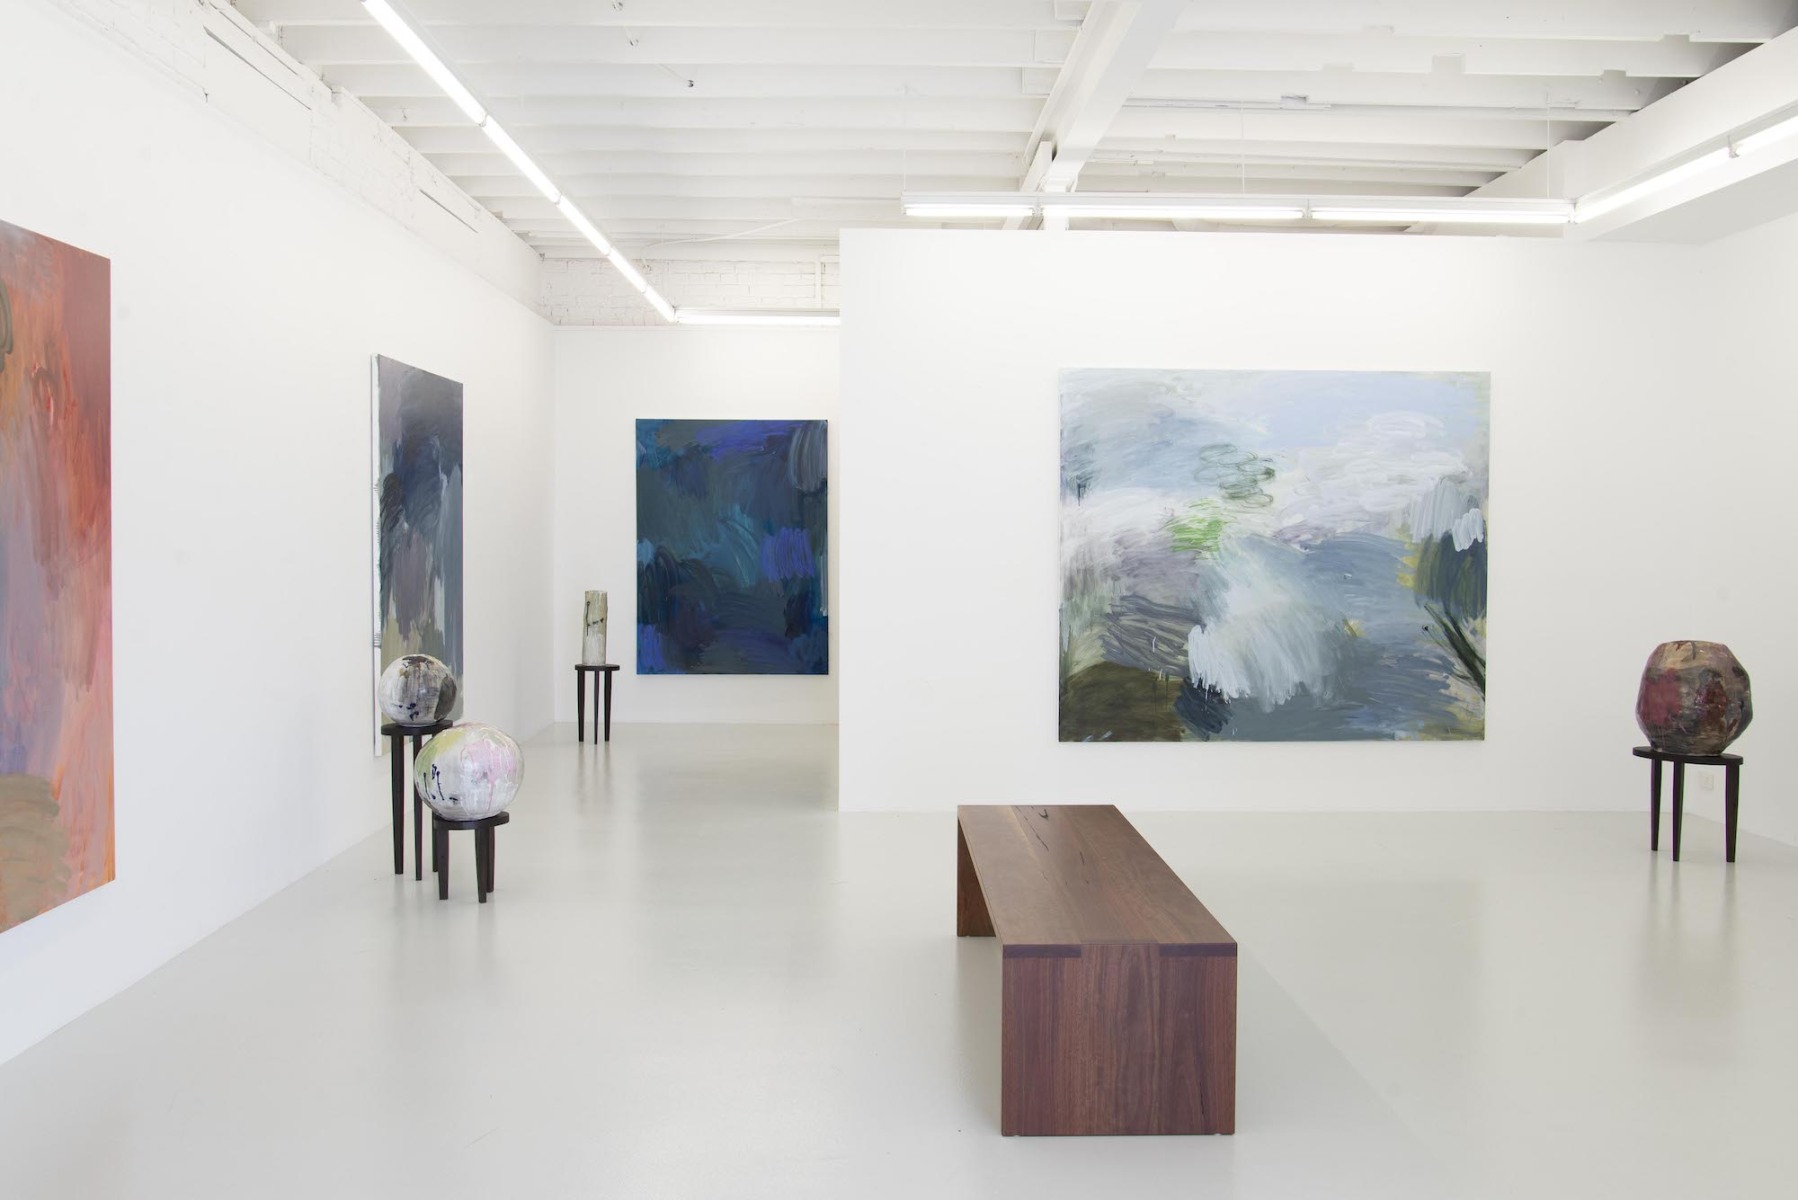 Large abstract canvases in cool and warm pastel colours fill a white gallery wall, small round sculptures sit on small black stools